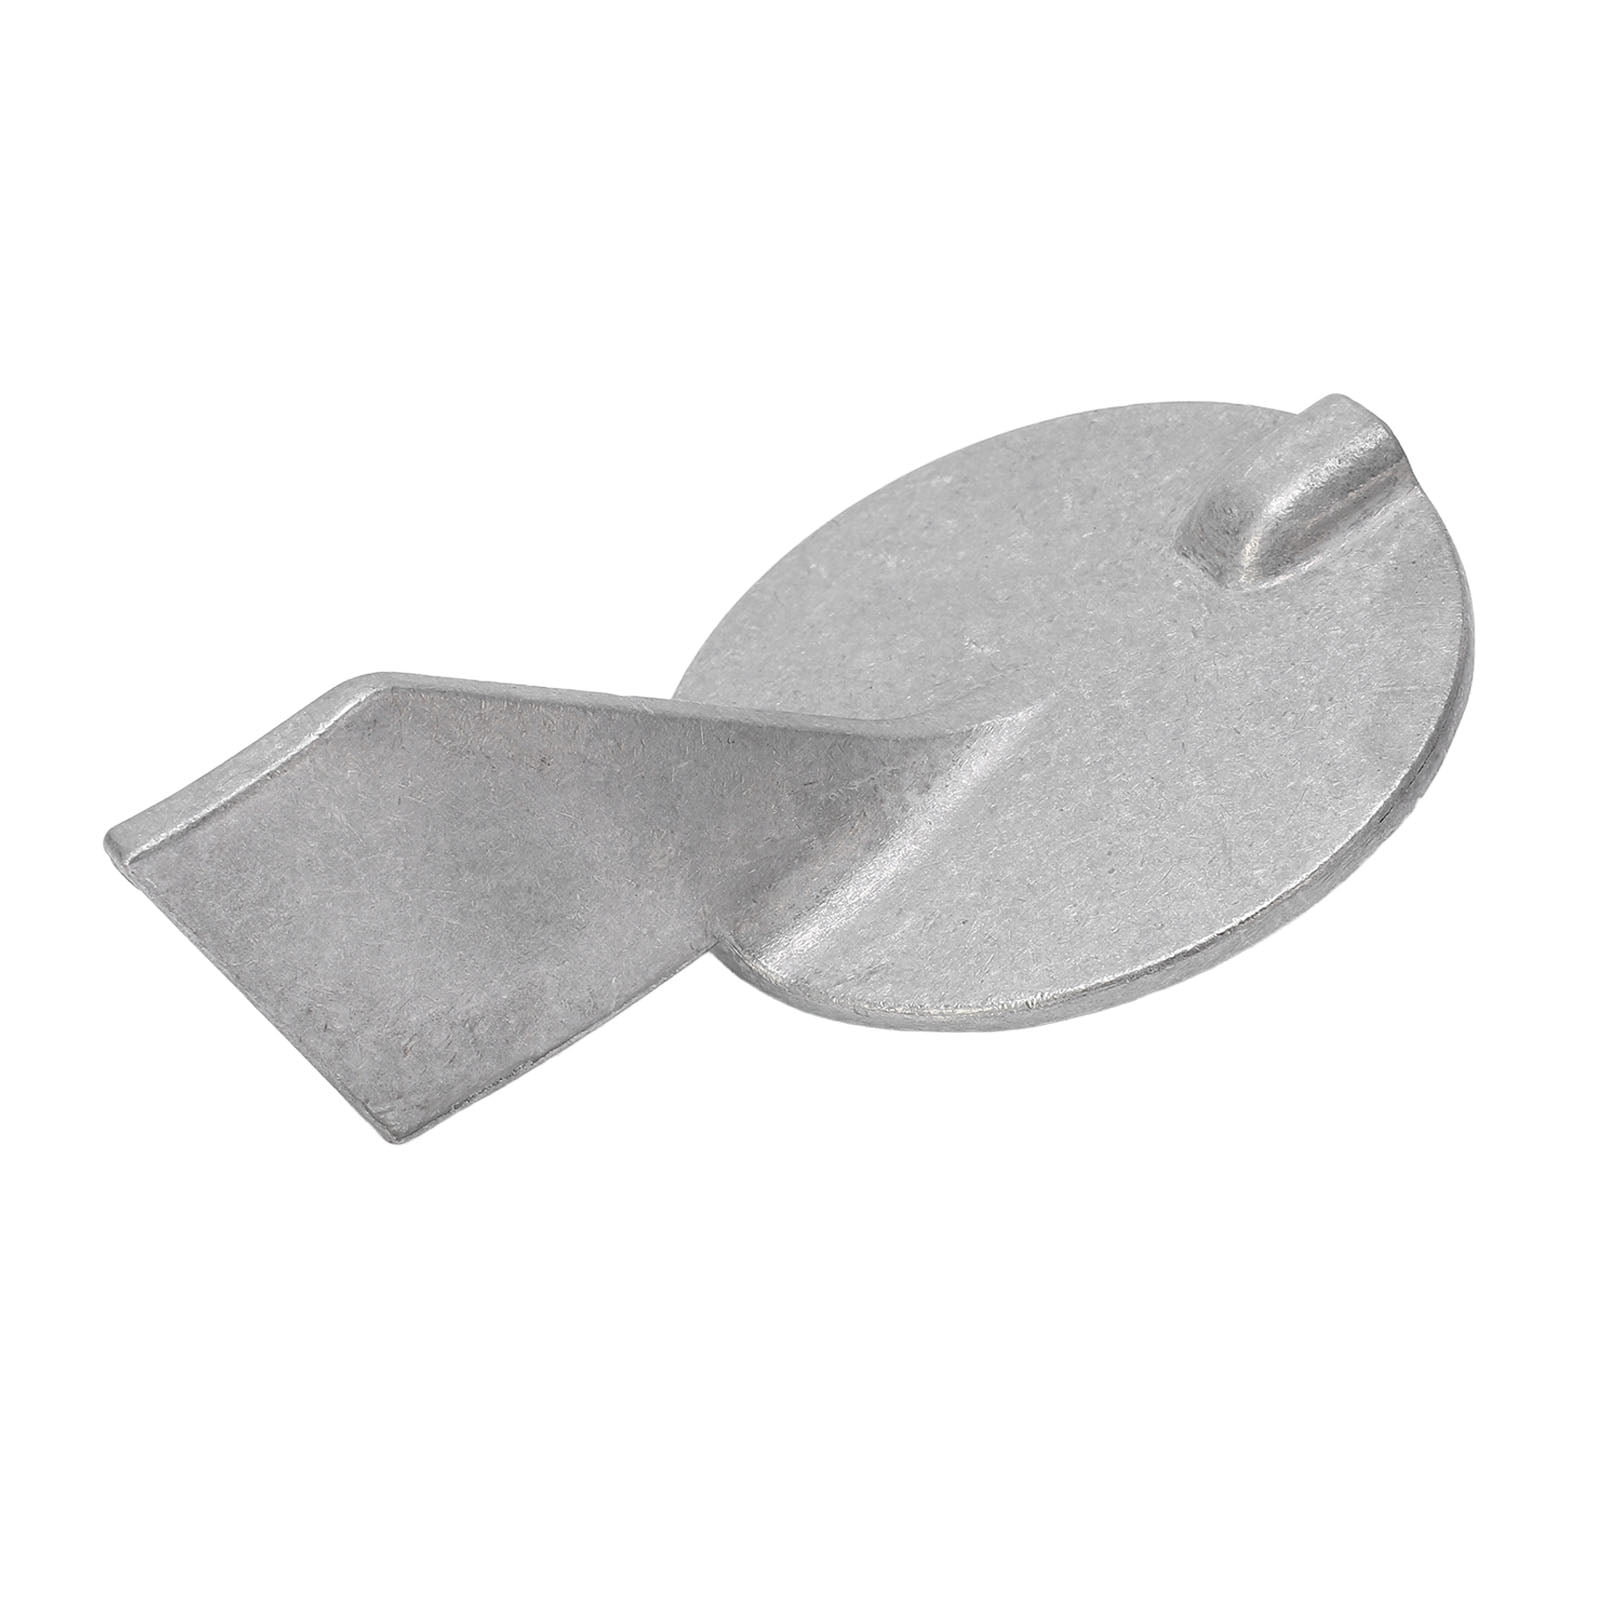 Sierra 18-6119Z Zinc Trim Tab Anode for Yamaha Outboard Engines 61A-45371-00-00 